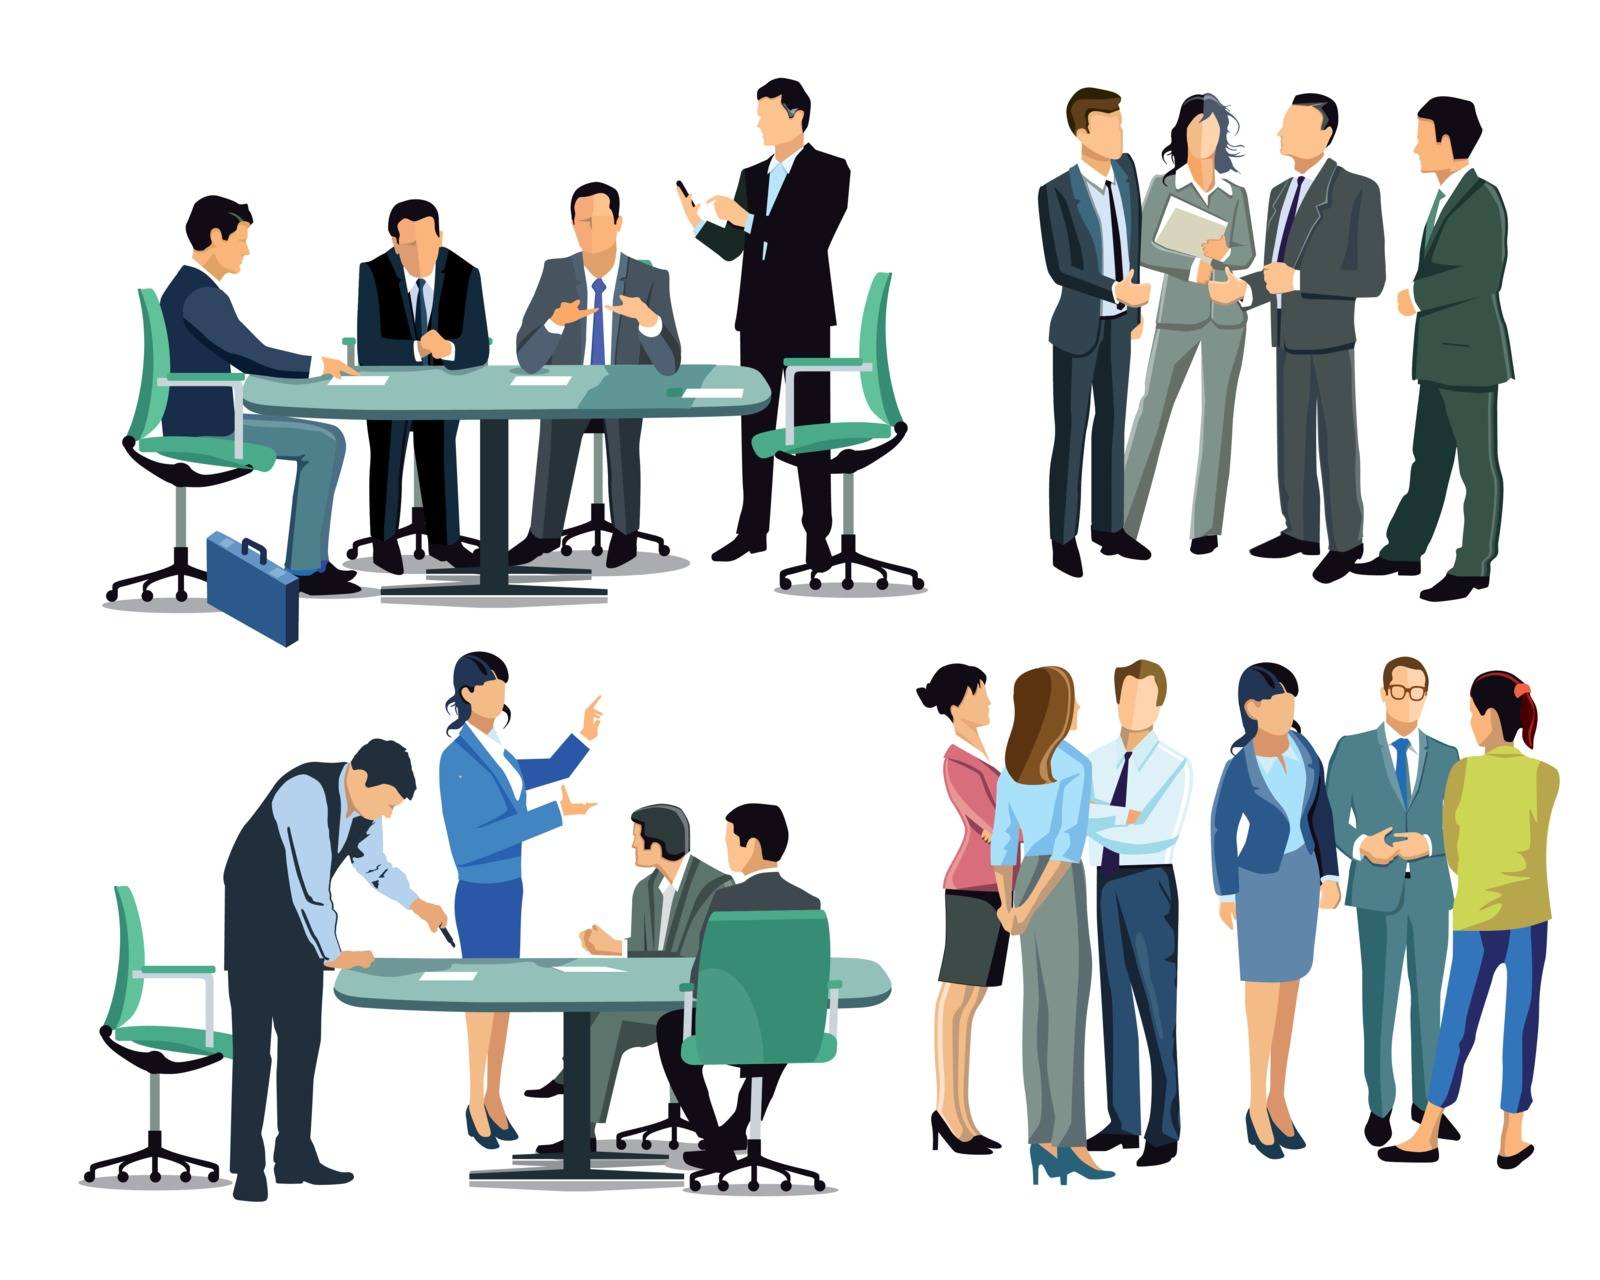 Business meeting among business people by scusi